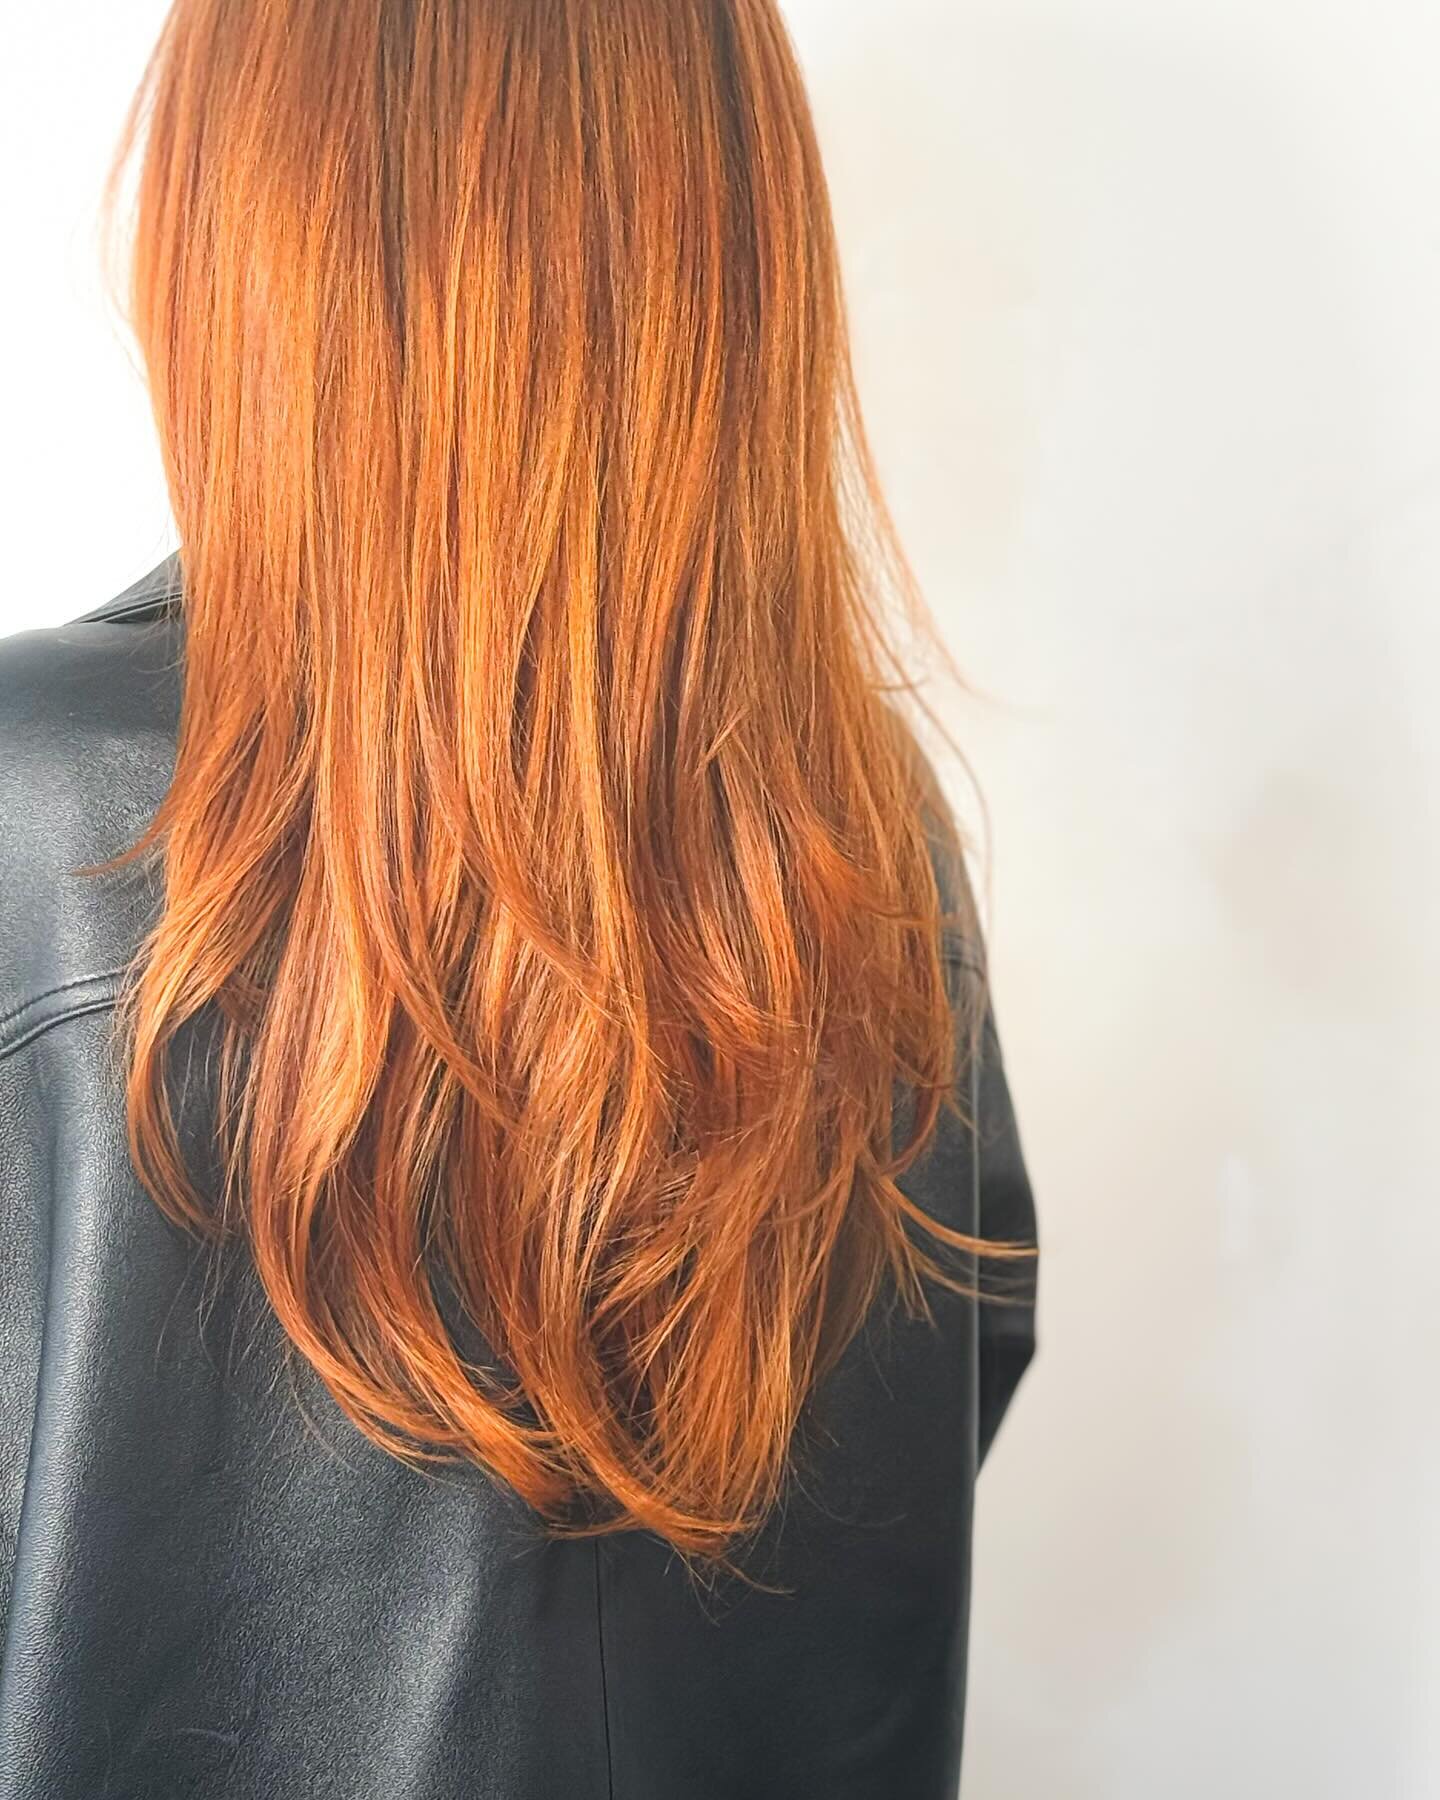 One drop dead red! Red hair is not just for fall, we tend to go a bit warmer in the fall/winter  and a bit cooler in the spring/summer but a magical copper is year round beautiful. 

This copper red and cut by @col.ourmein.kindness for @houseofpop us